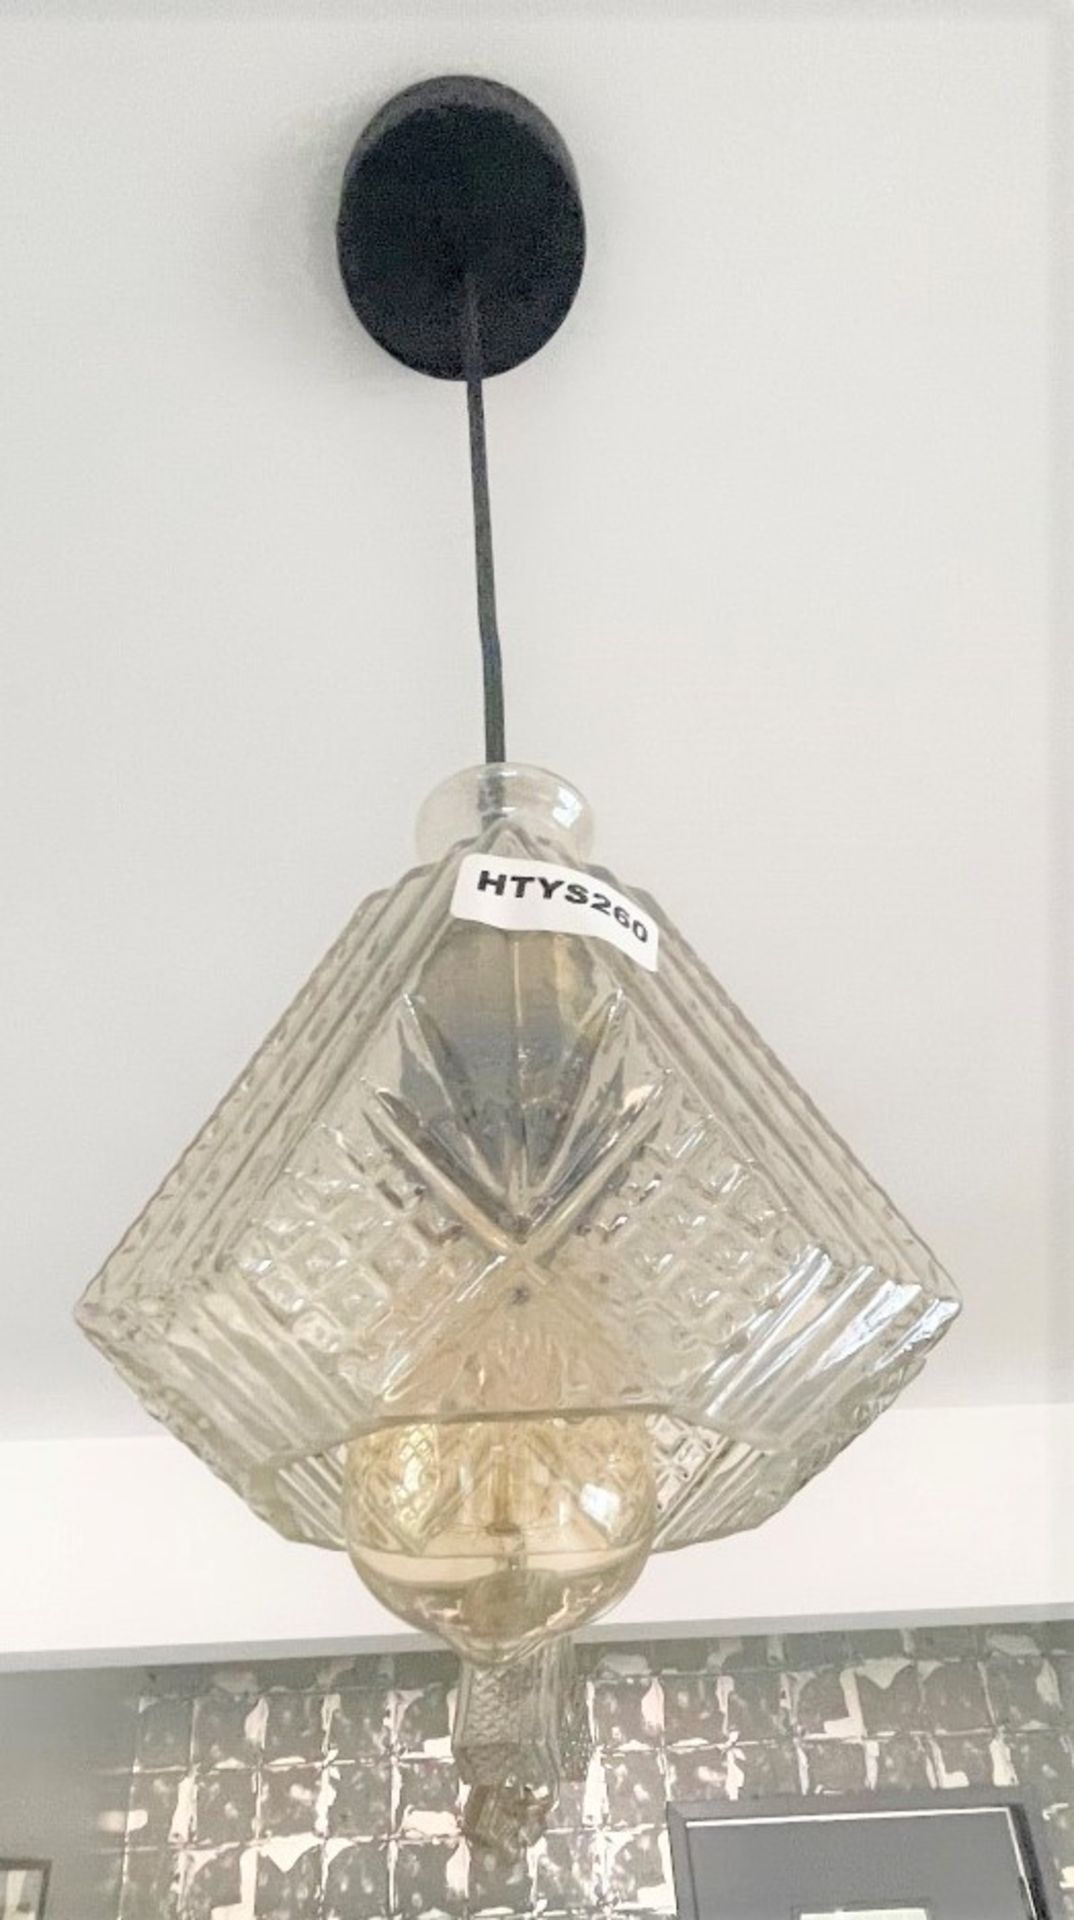 4 x Decorative Glass Ceiling Light Fittings - Suspended Drop 65cms